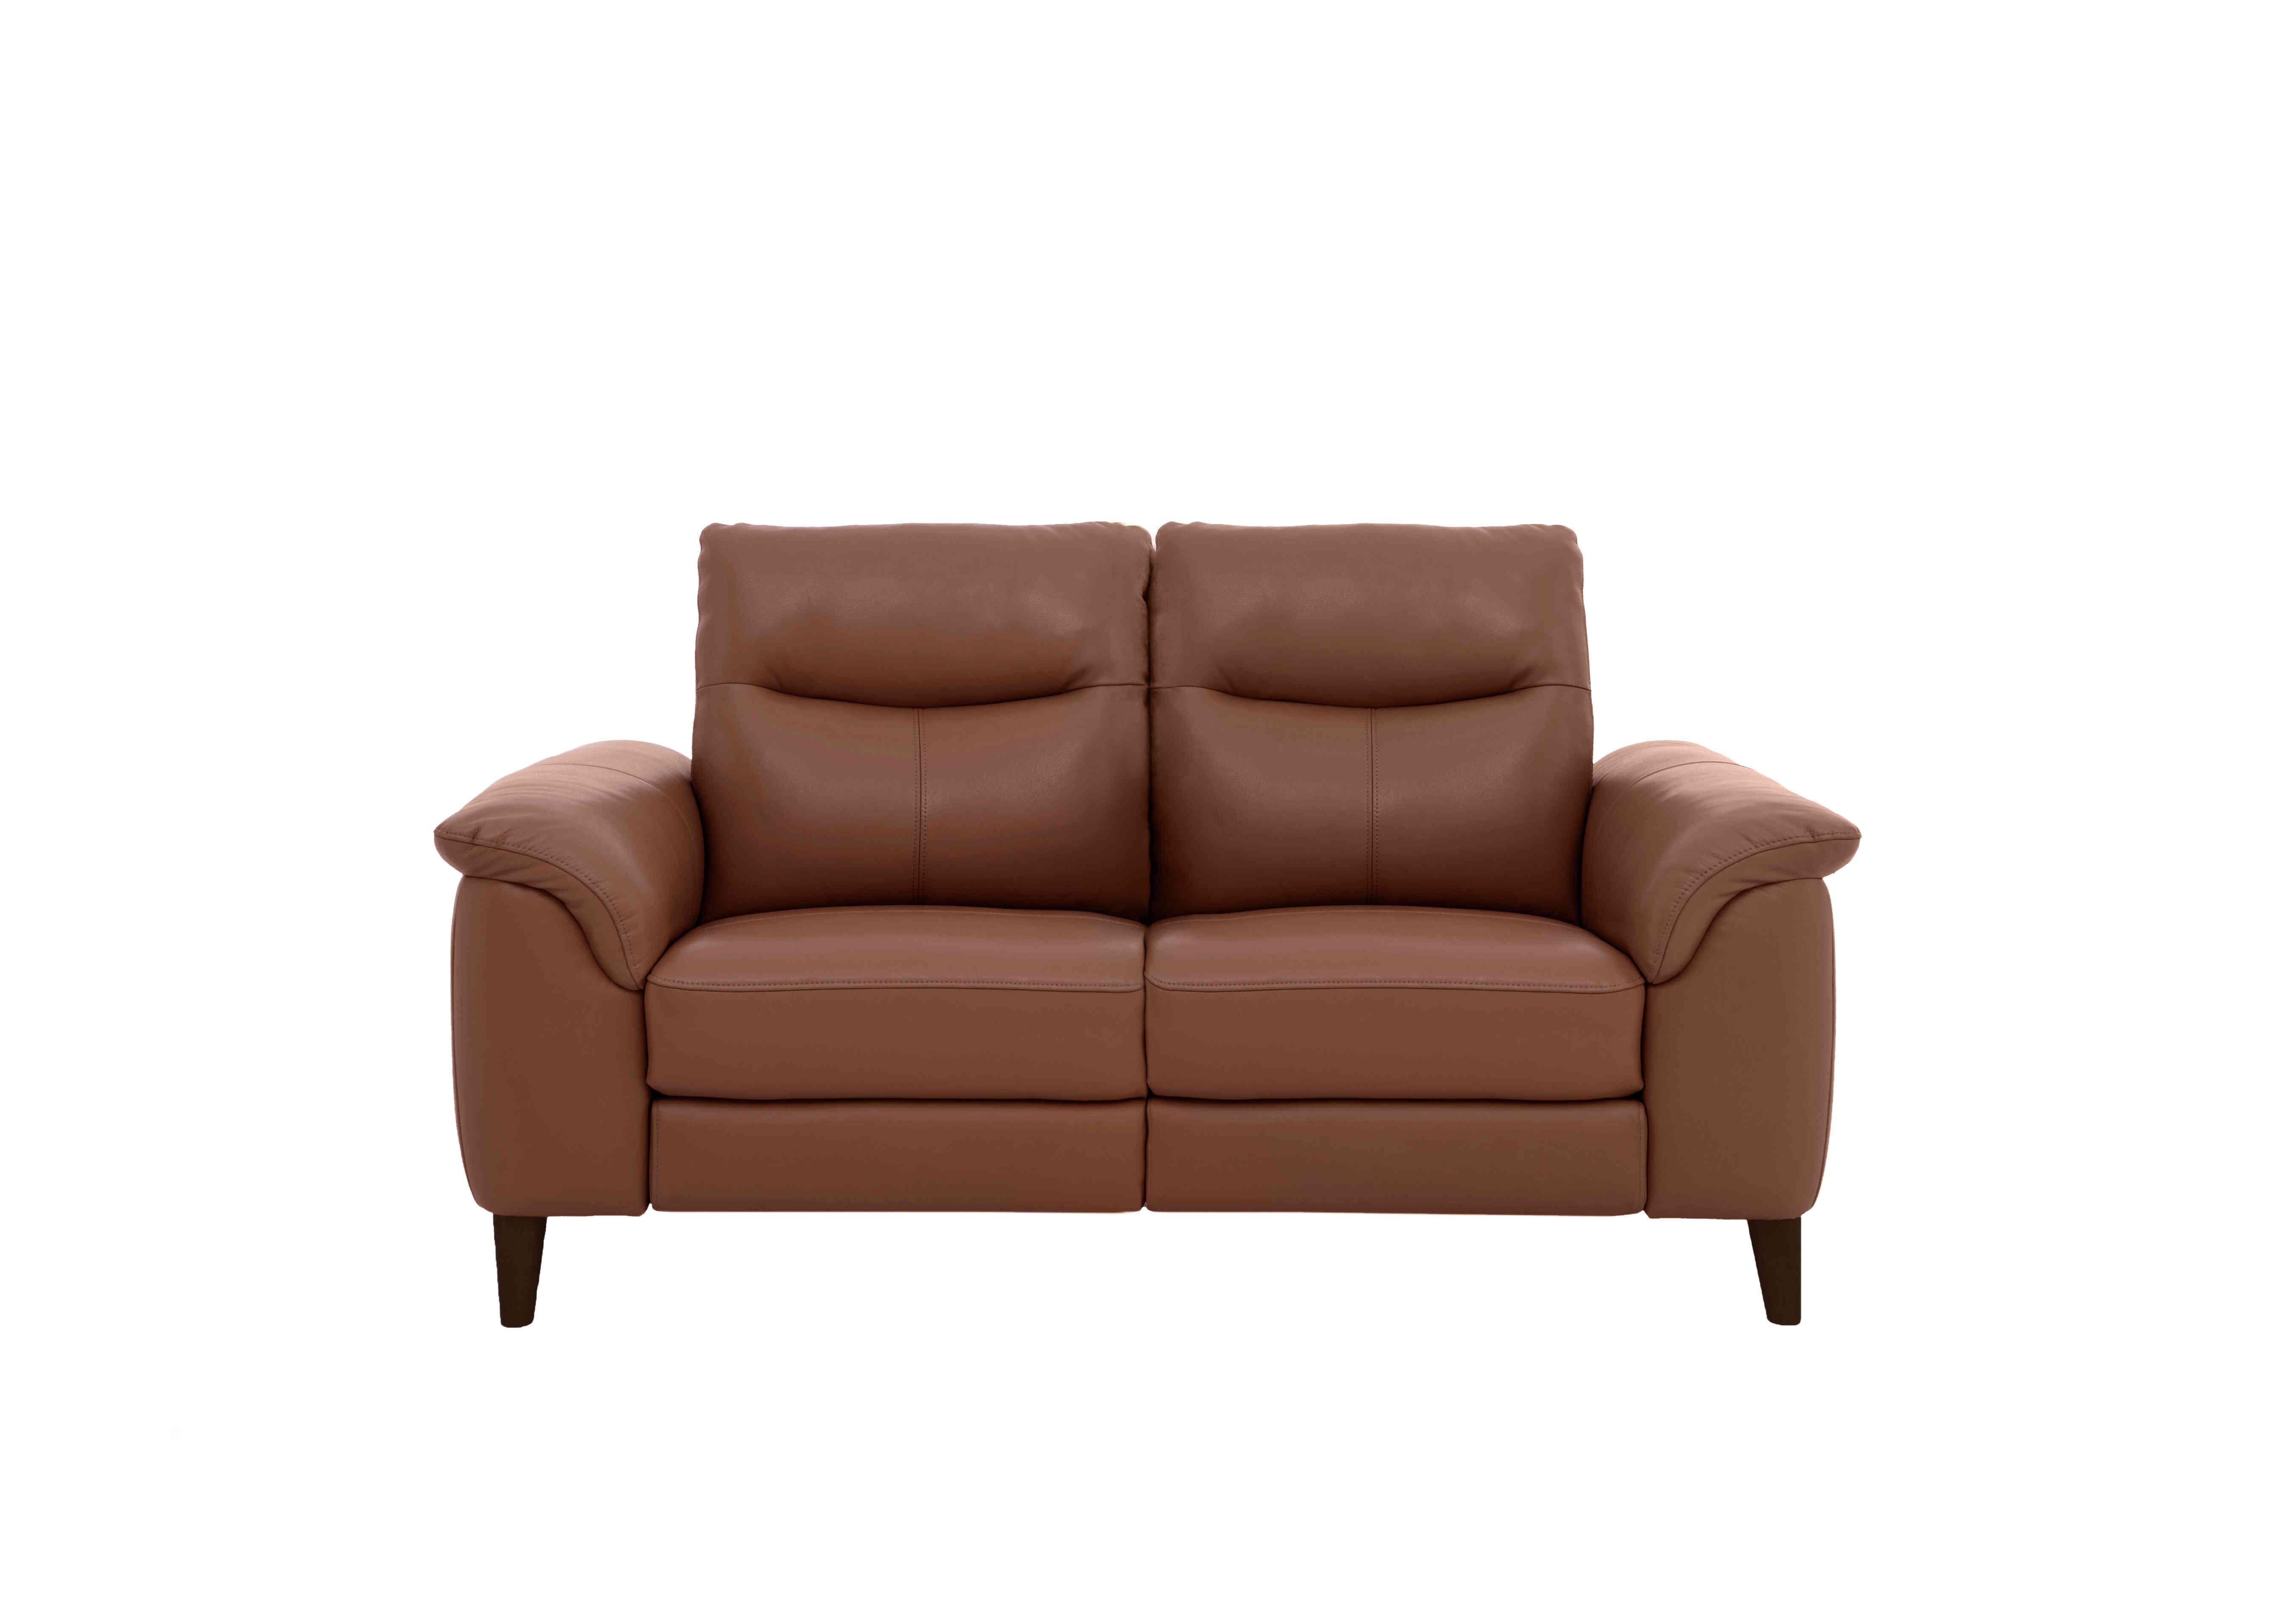 Morgan 2 Seater Leather Sofa in Florida Butterscotch Cat-35/11 on Furniture Village